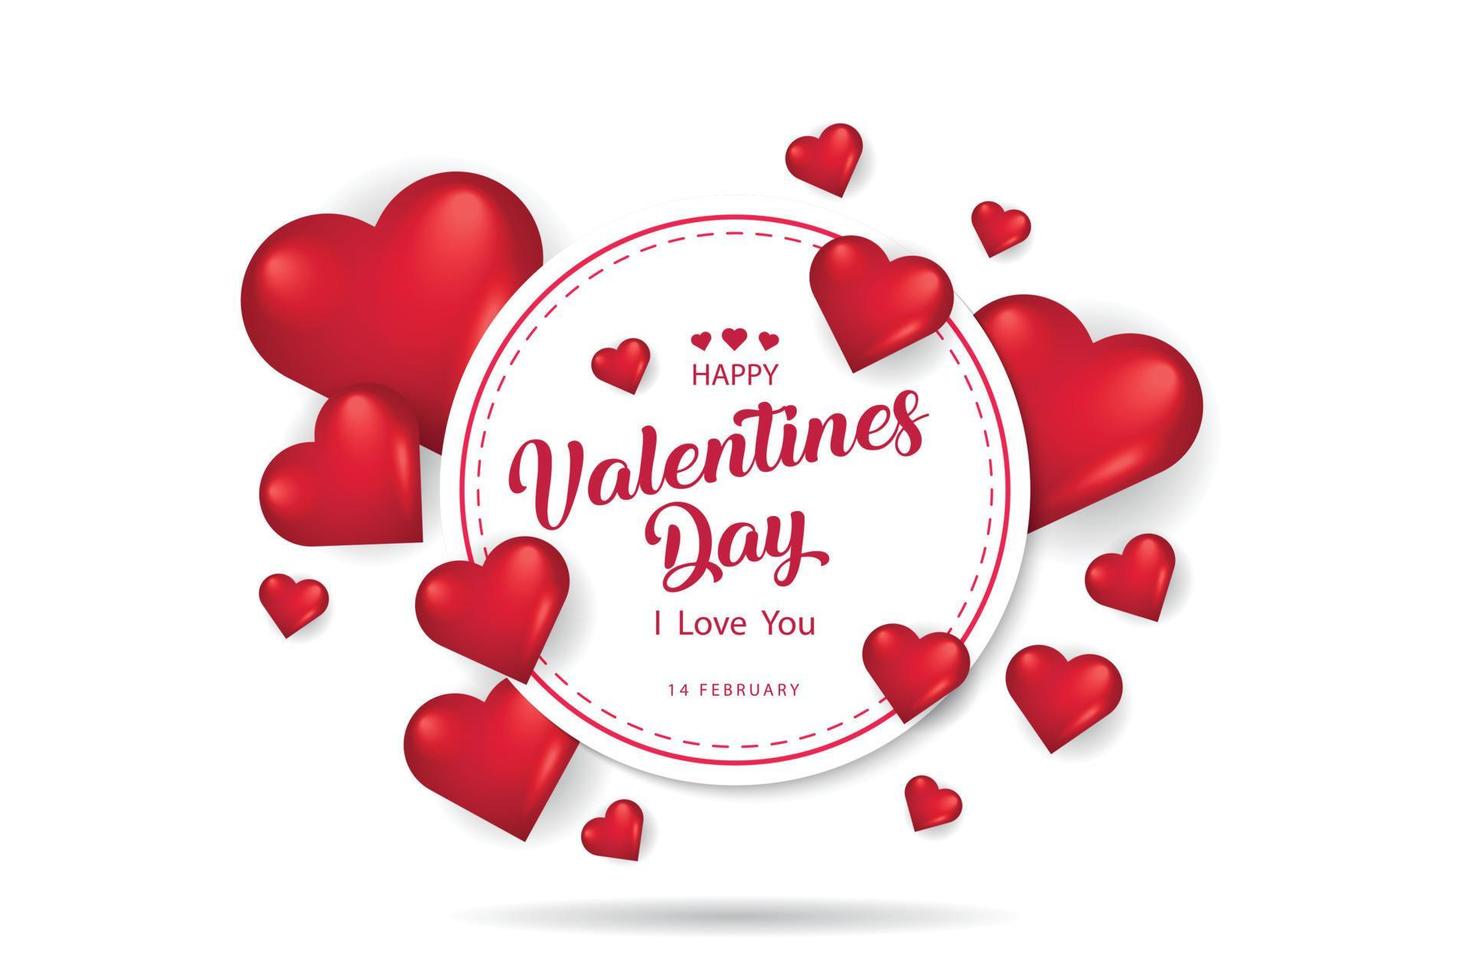 Festive Card for Happy Valentine's Day. On White Color Background.Vector Illustration vector